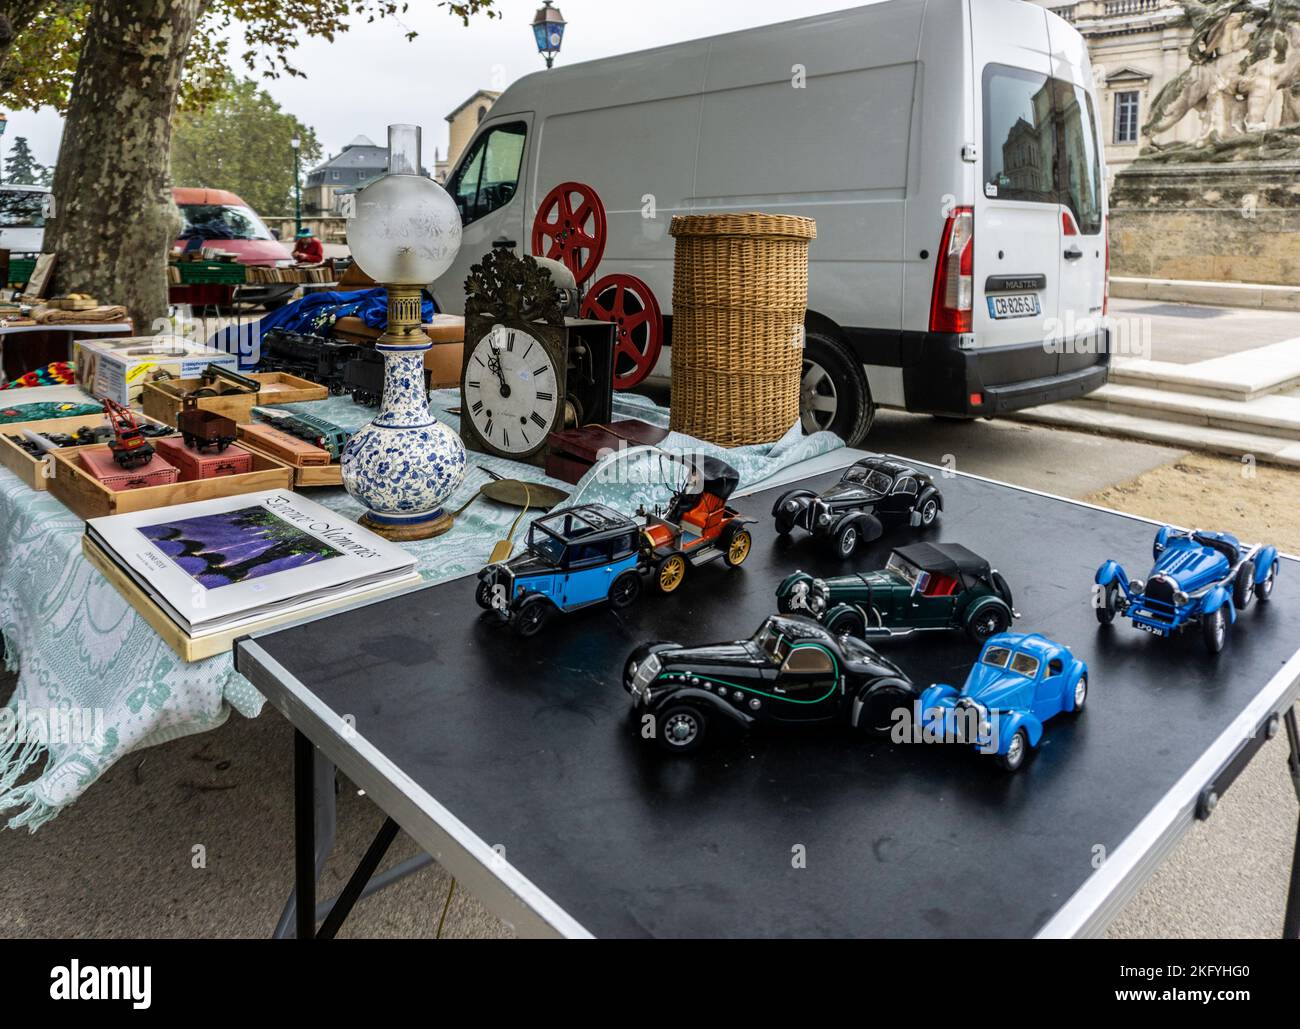 The Sunday flea market in the Peyrou in Montpelier, France. A large market selling a wide range of items. Among the items here miniature cars. Stock Photo